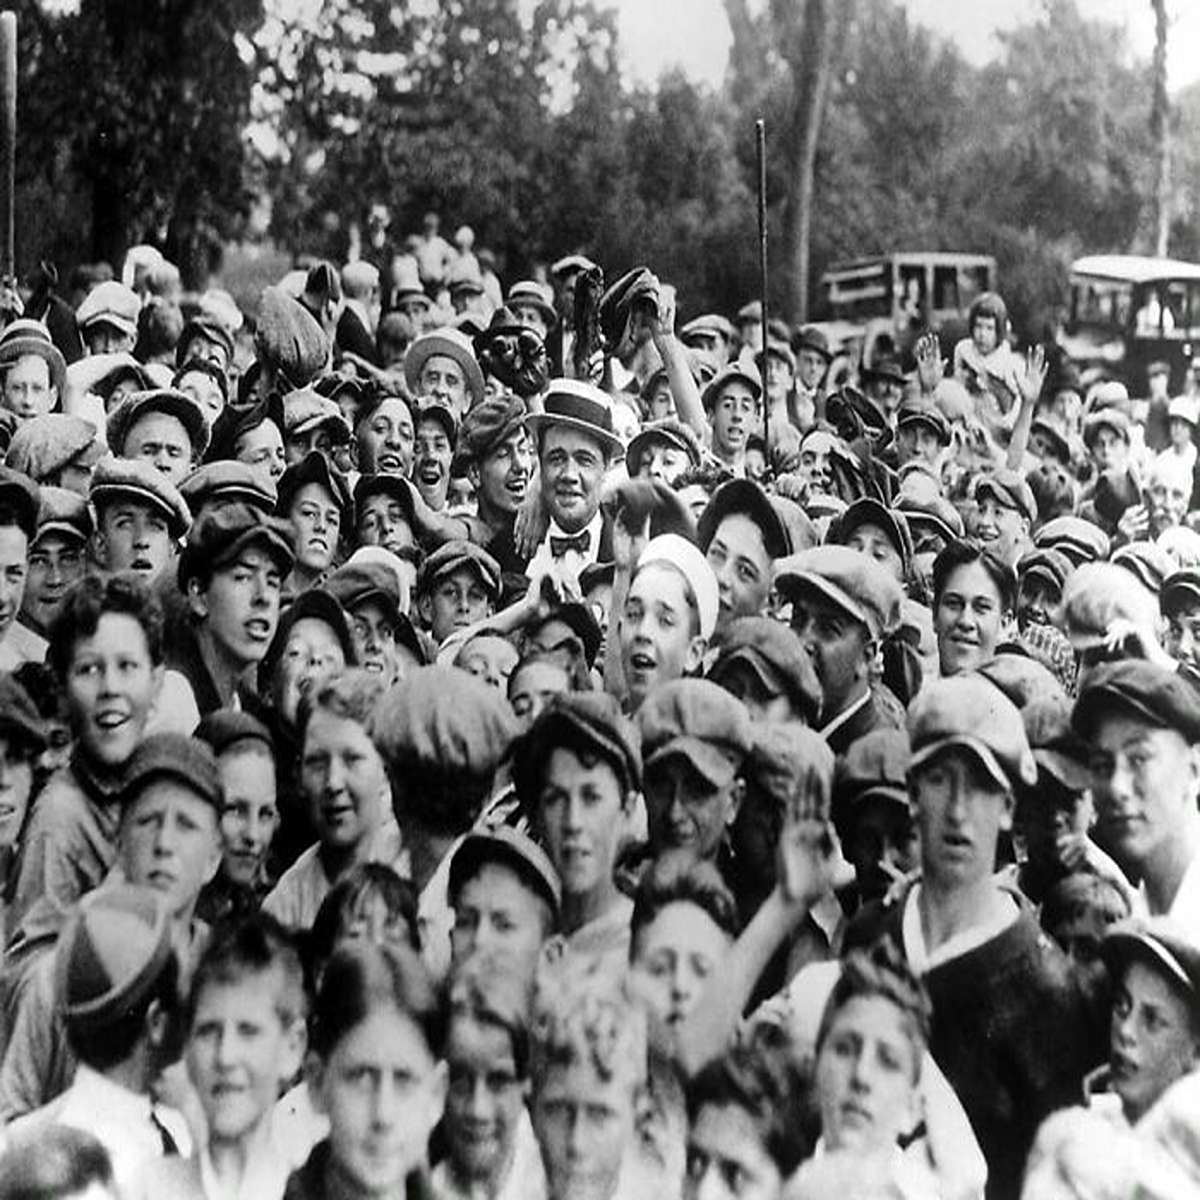 Babe Ruth Right In The Middle Of His Fans In 1926